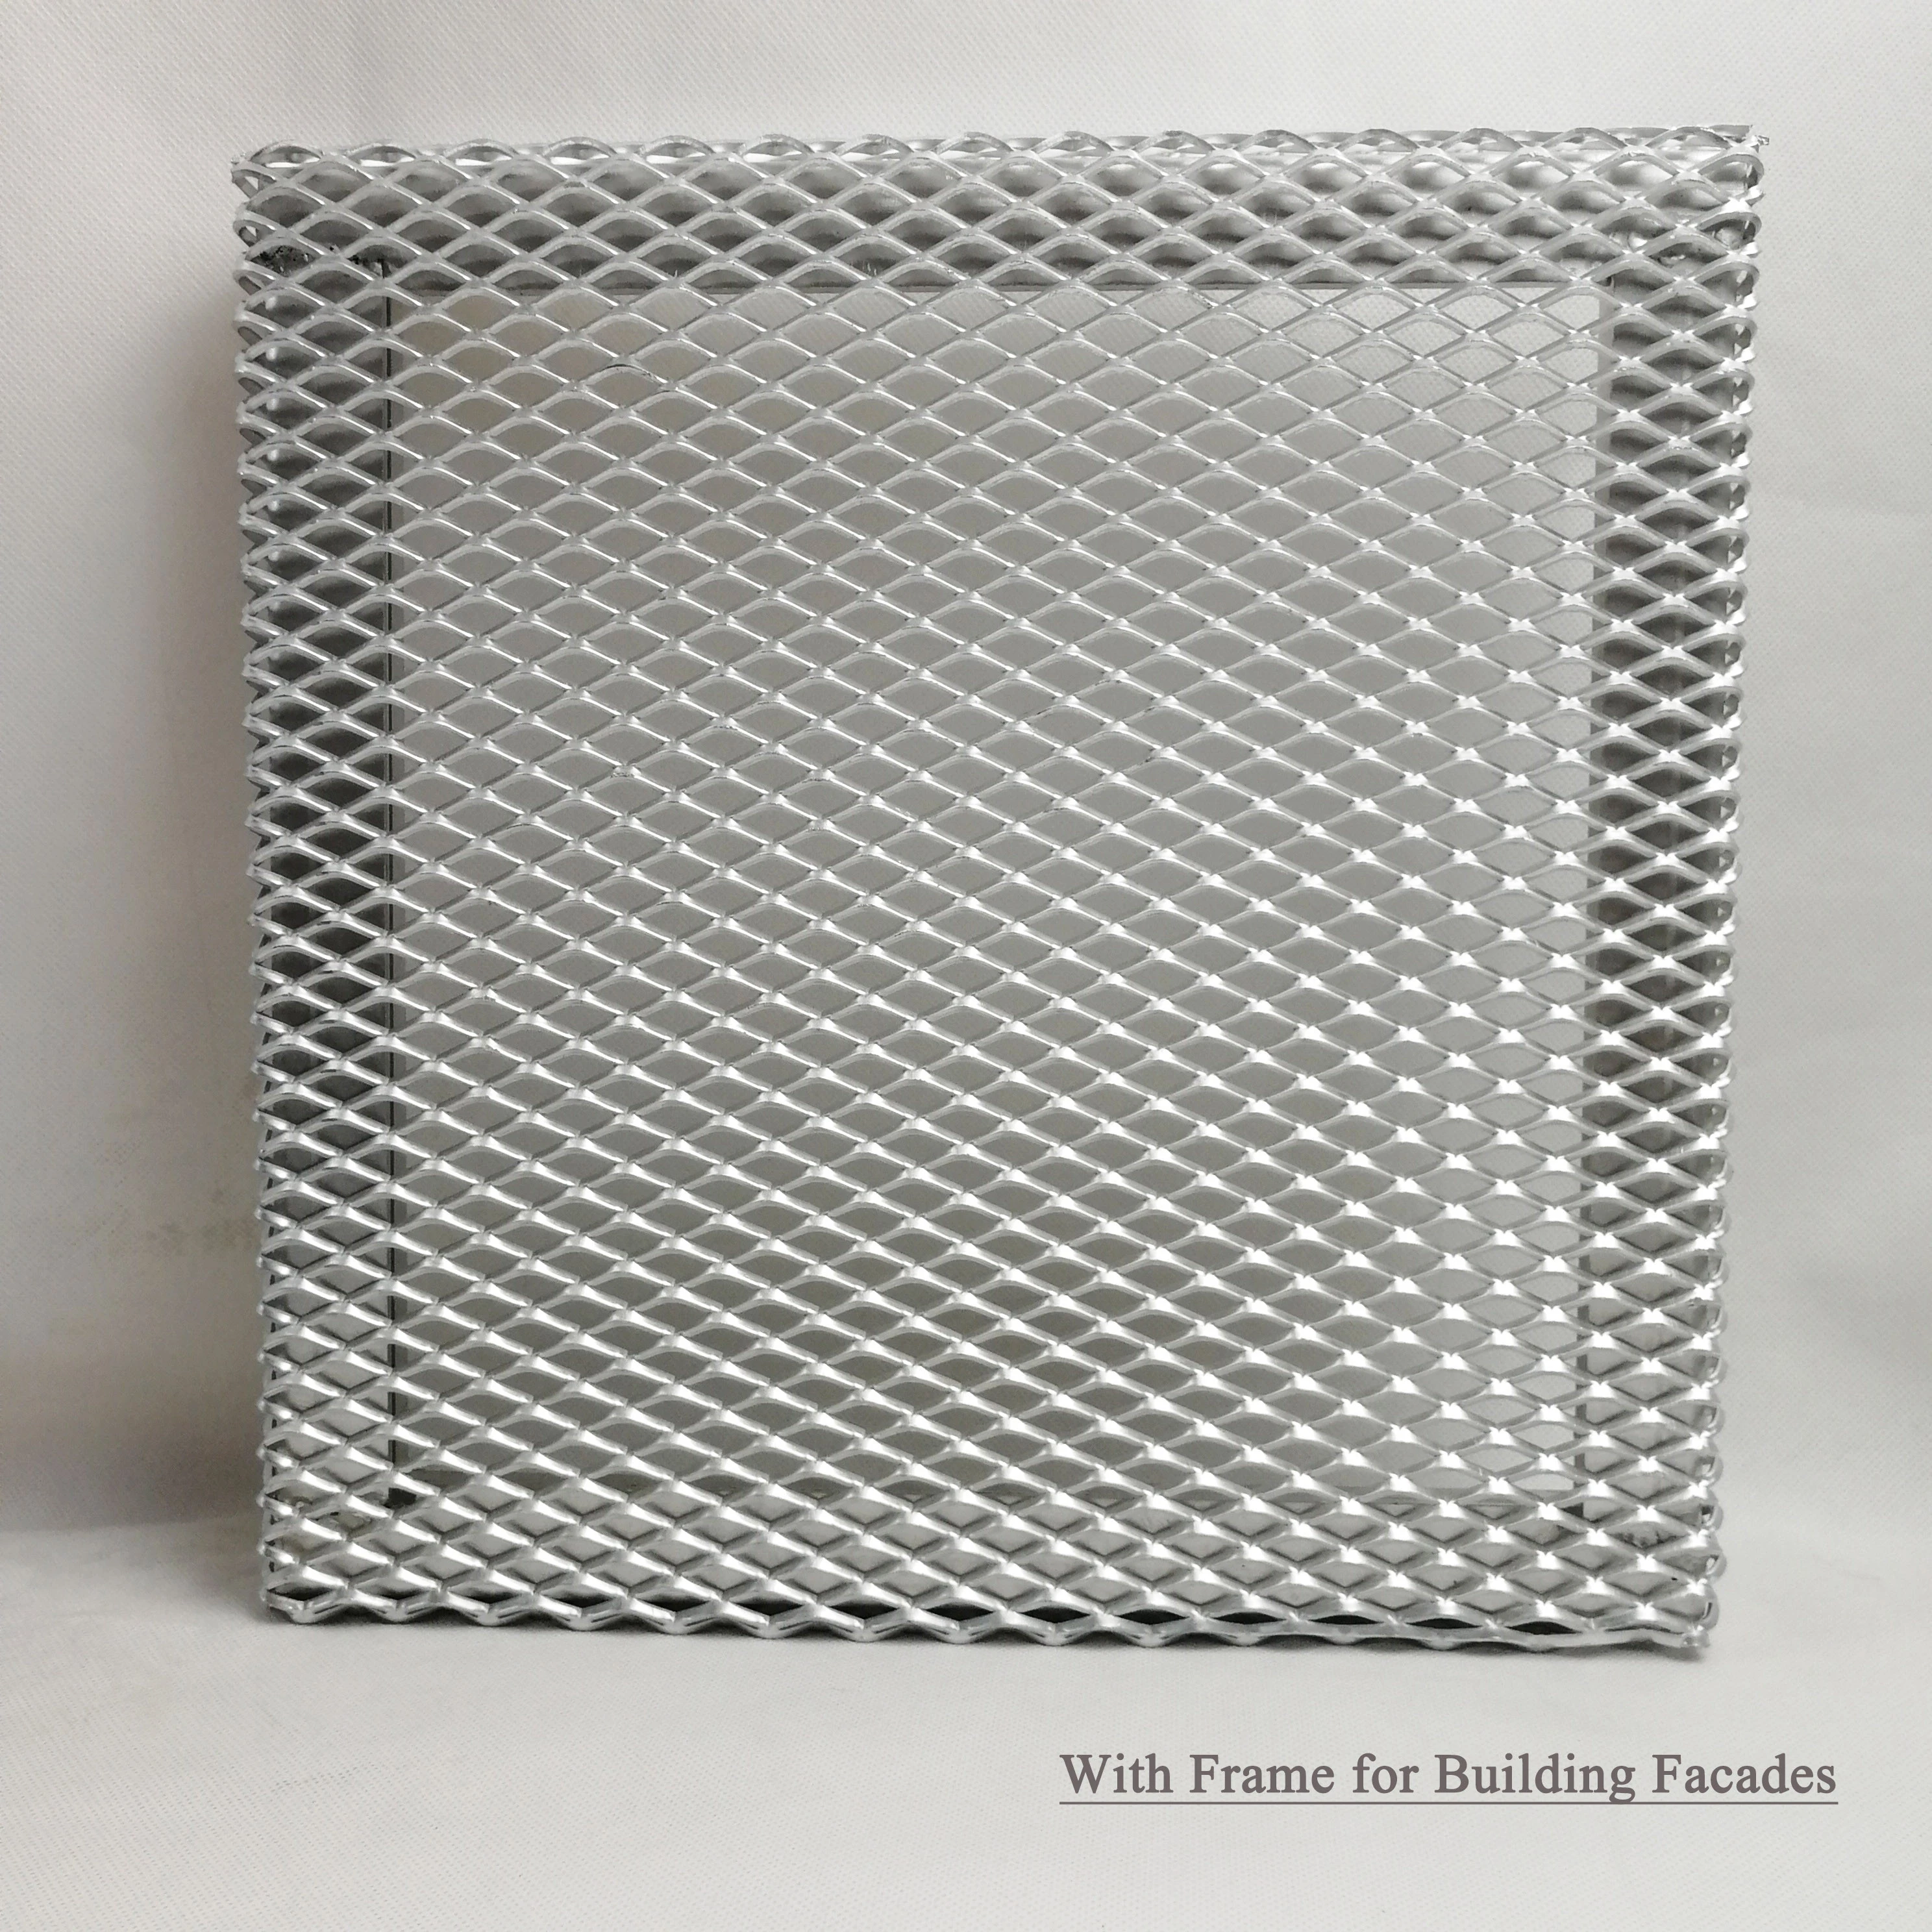 High Quality Aluminum Expanded Metal Mesh Panel for Exterior Facades